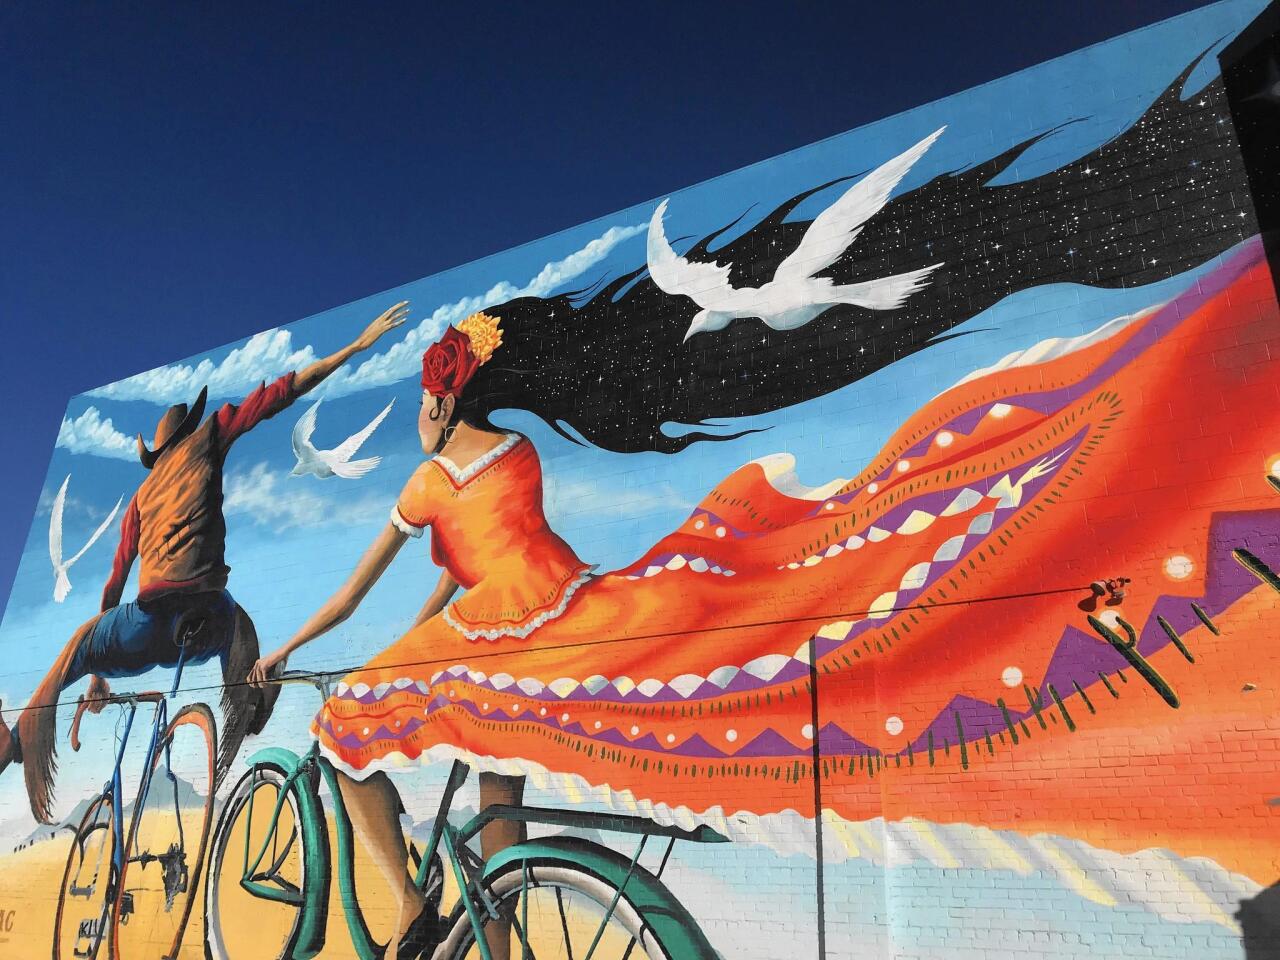 Native Tucsonan Joe Pagac painted this huge mural celebrating Tucson’s cycling culture in 2017 after raising money for the project on Kickstarter.